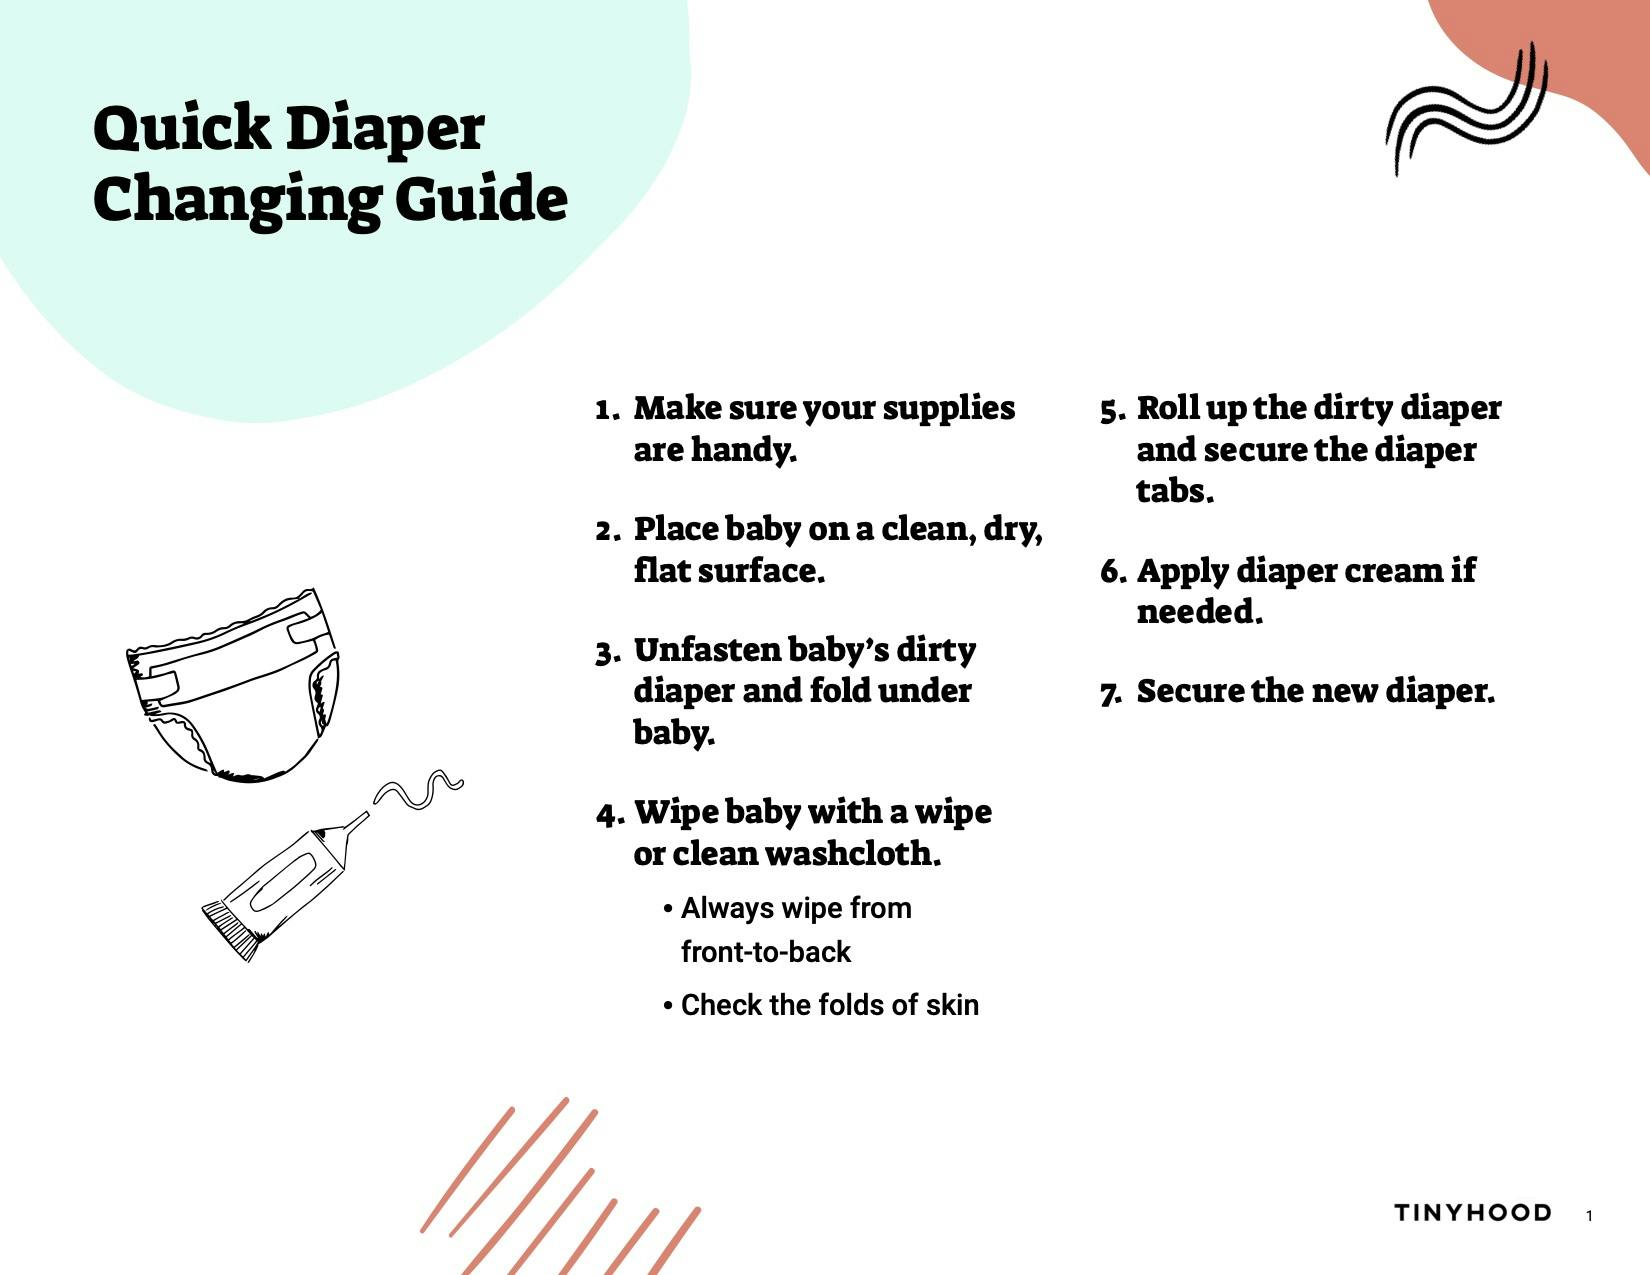 Preview image of Handout: Quick Diapering Guide